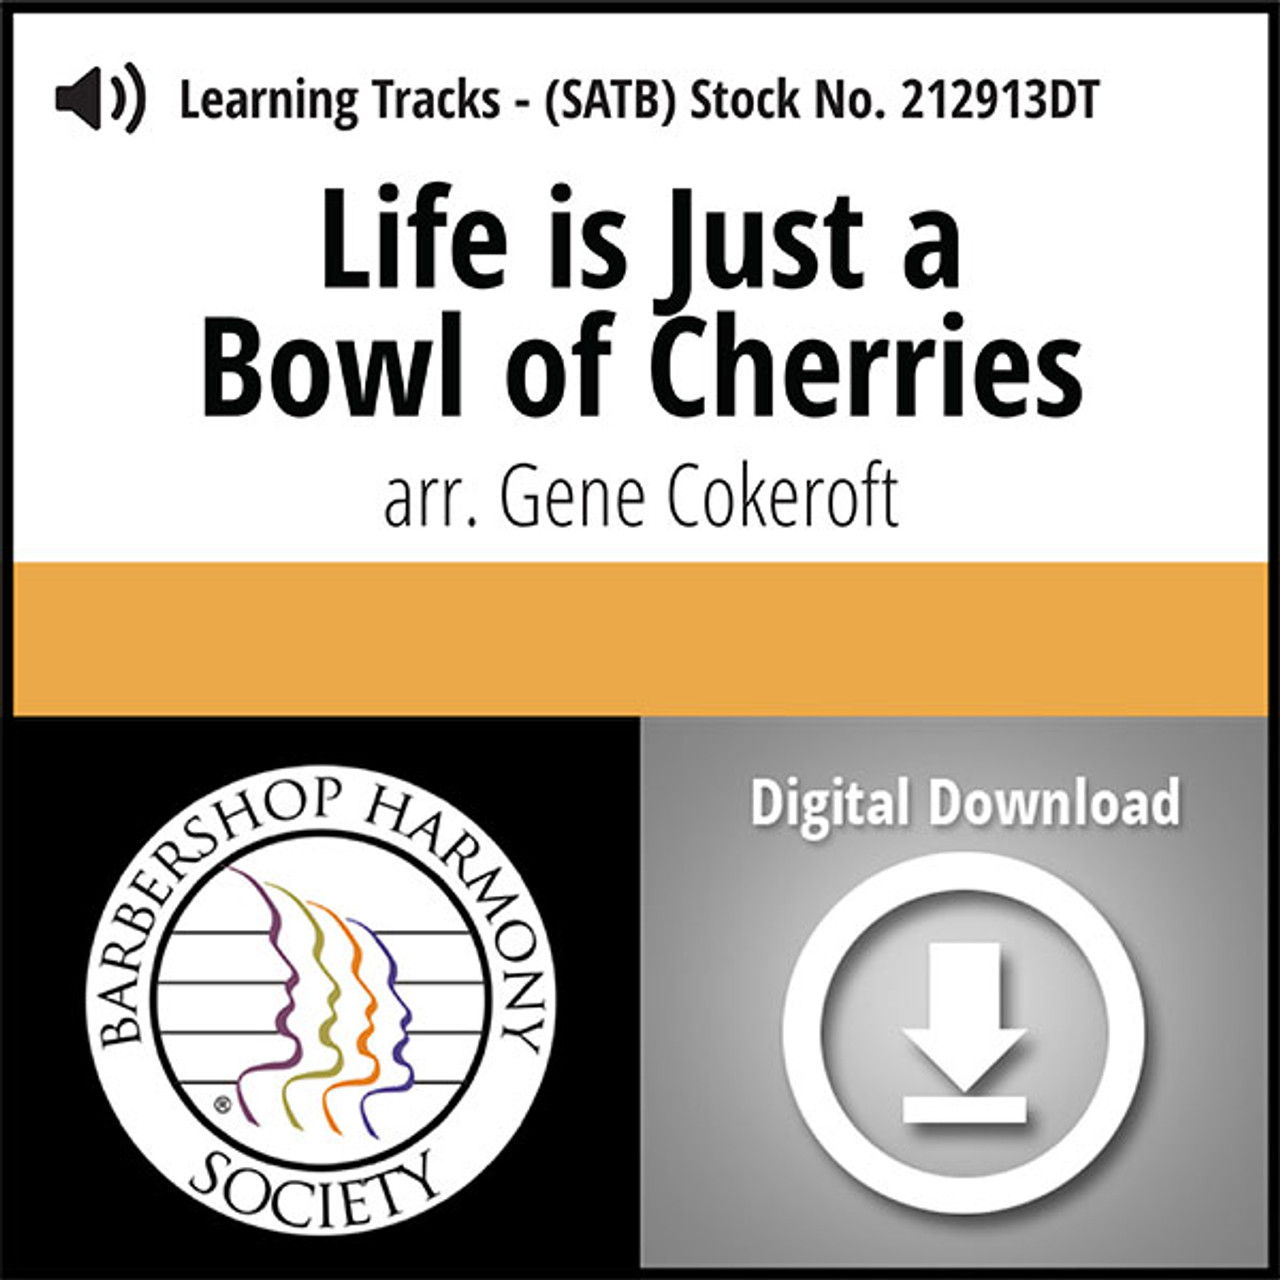 Life Is Just a Bowl of Cherries (SATB) (arr. Cokeroft) - Digital Learning Tracks for 212912